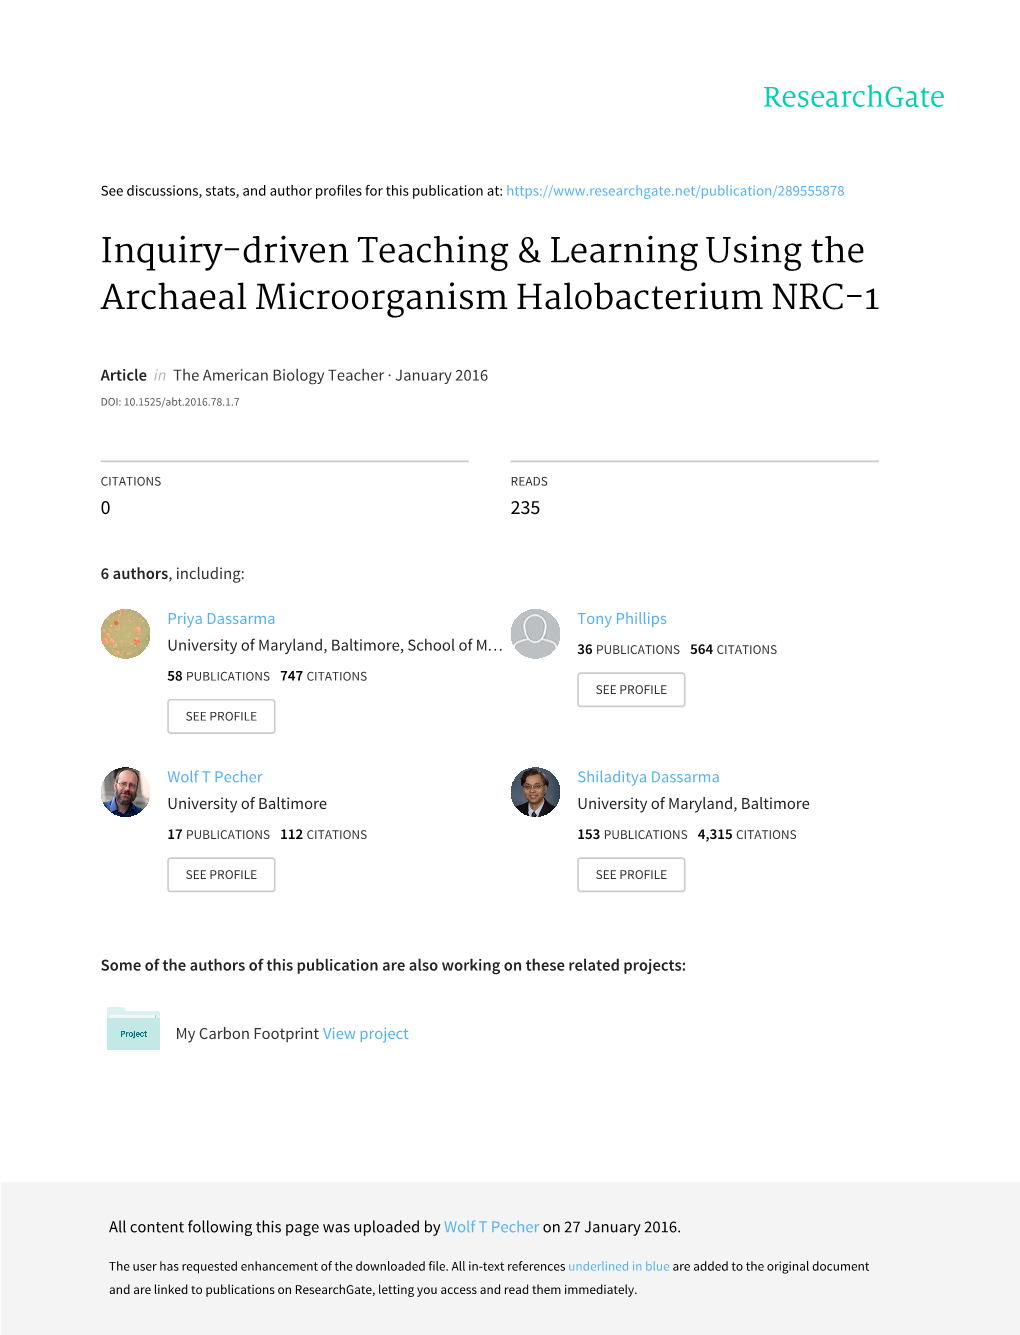 Inquiry-Driven Teaching & Learning Using the Archaeal Microorganism